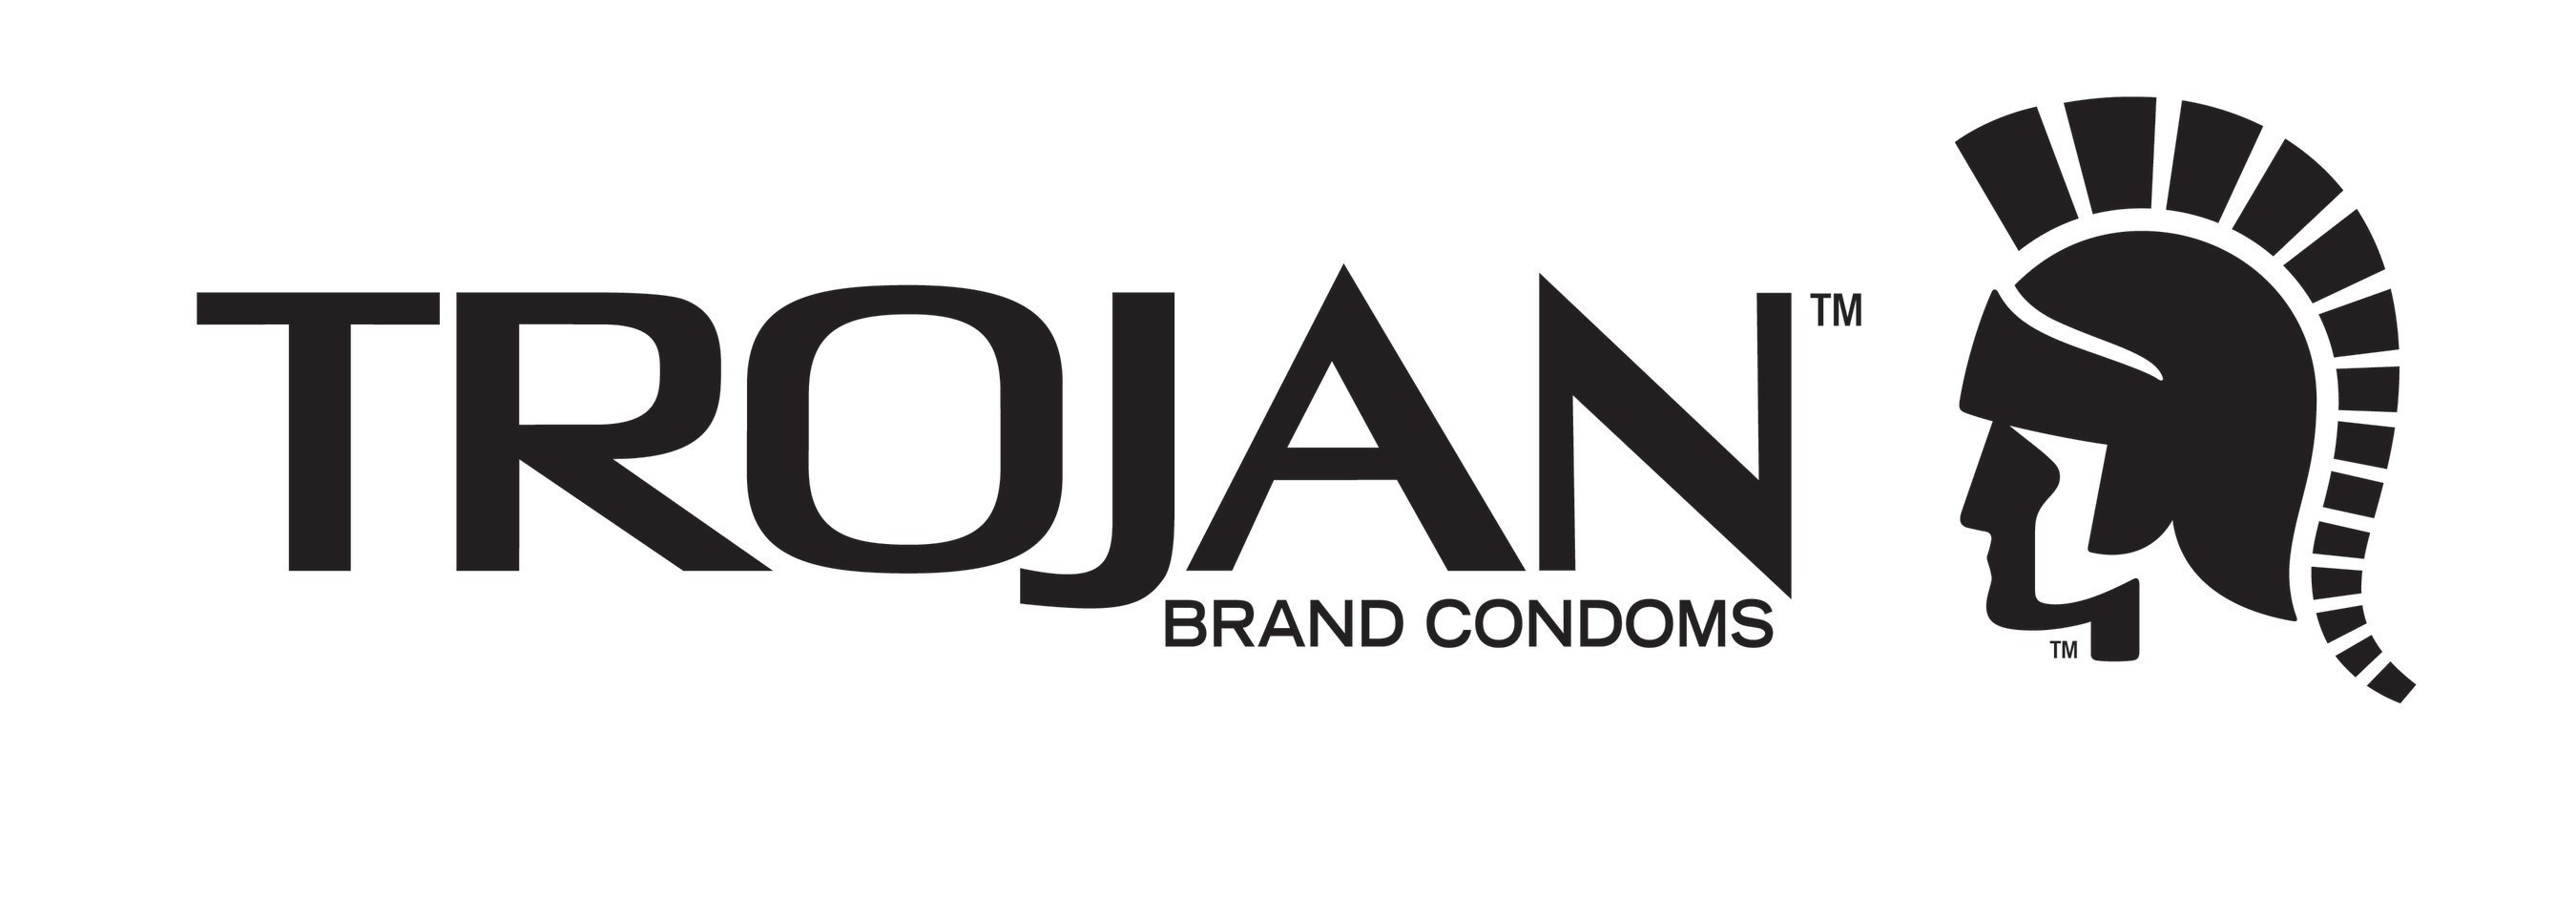 The Maker of Trojan(TM) Brand Condoms Partners with the CDC Foundation to Provide Over 150,000 Condoms to Help Reduce the Threat of Zika